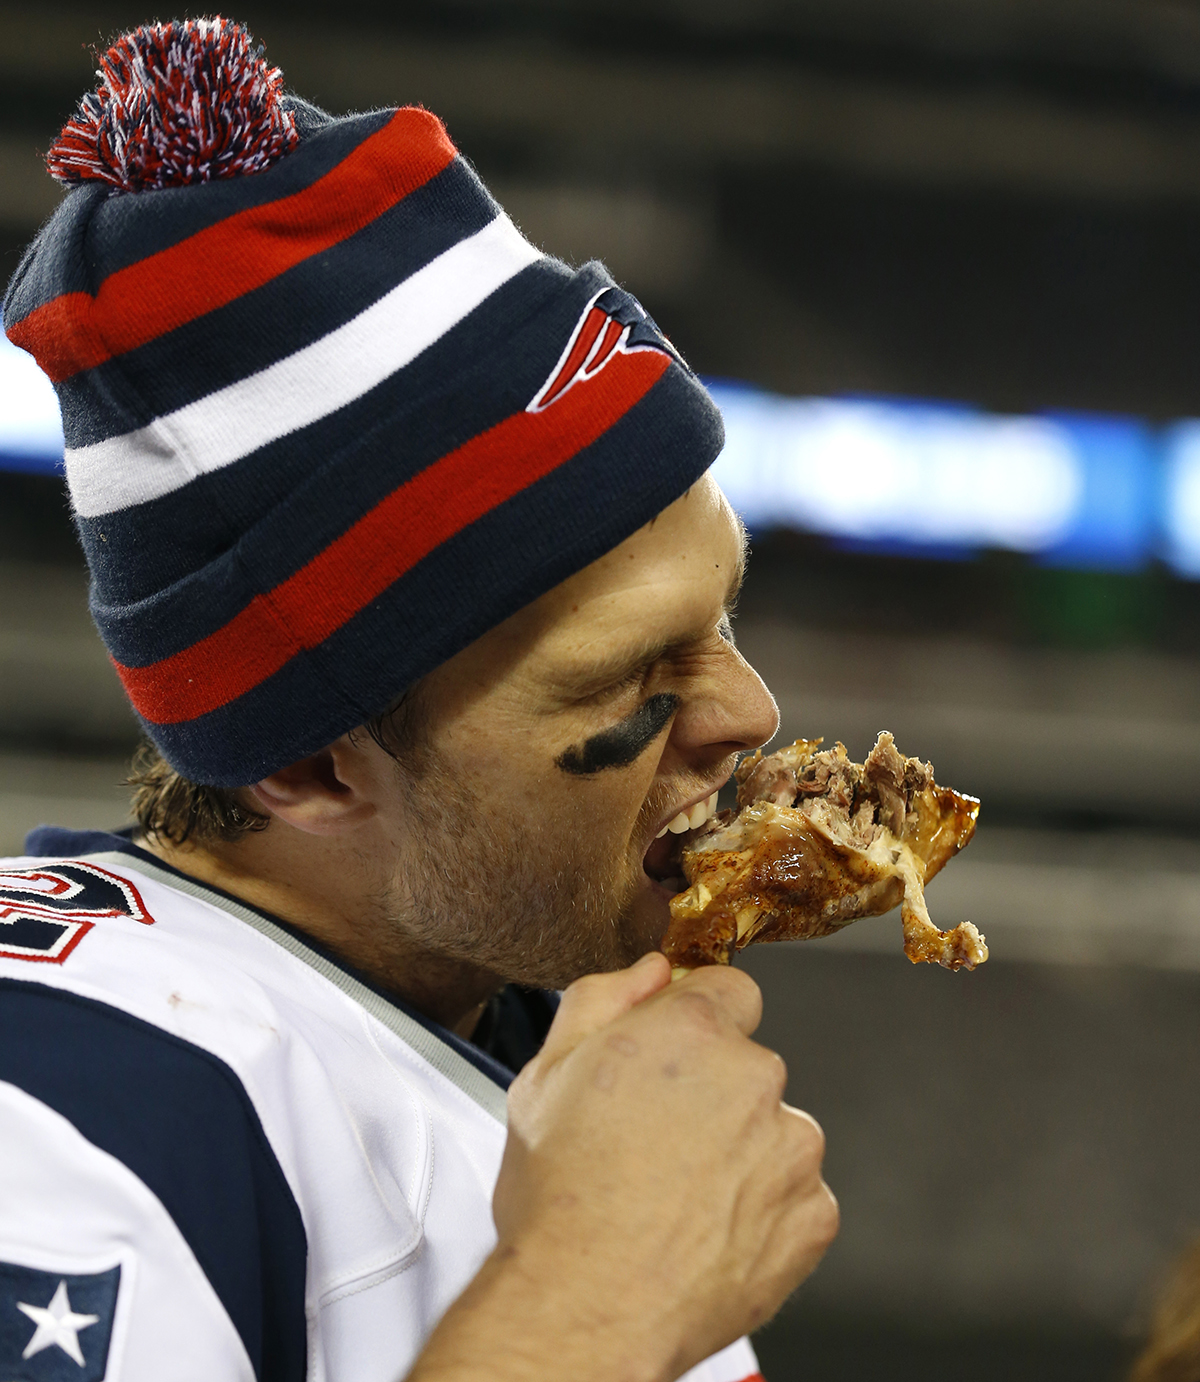 New England Patriots quarterback Tom Brady holds a turkey leg after an NFL football game against the New York Jets Thursday, Nov. 22, 2012 in East Rutherford, N.J. The Patriots won the game 49-19. / Photo by Julio Cortez via AP